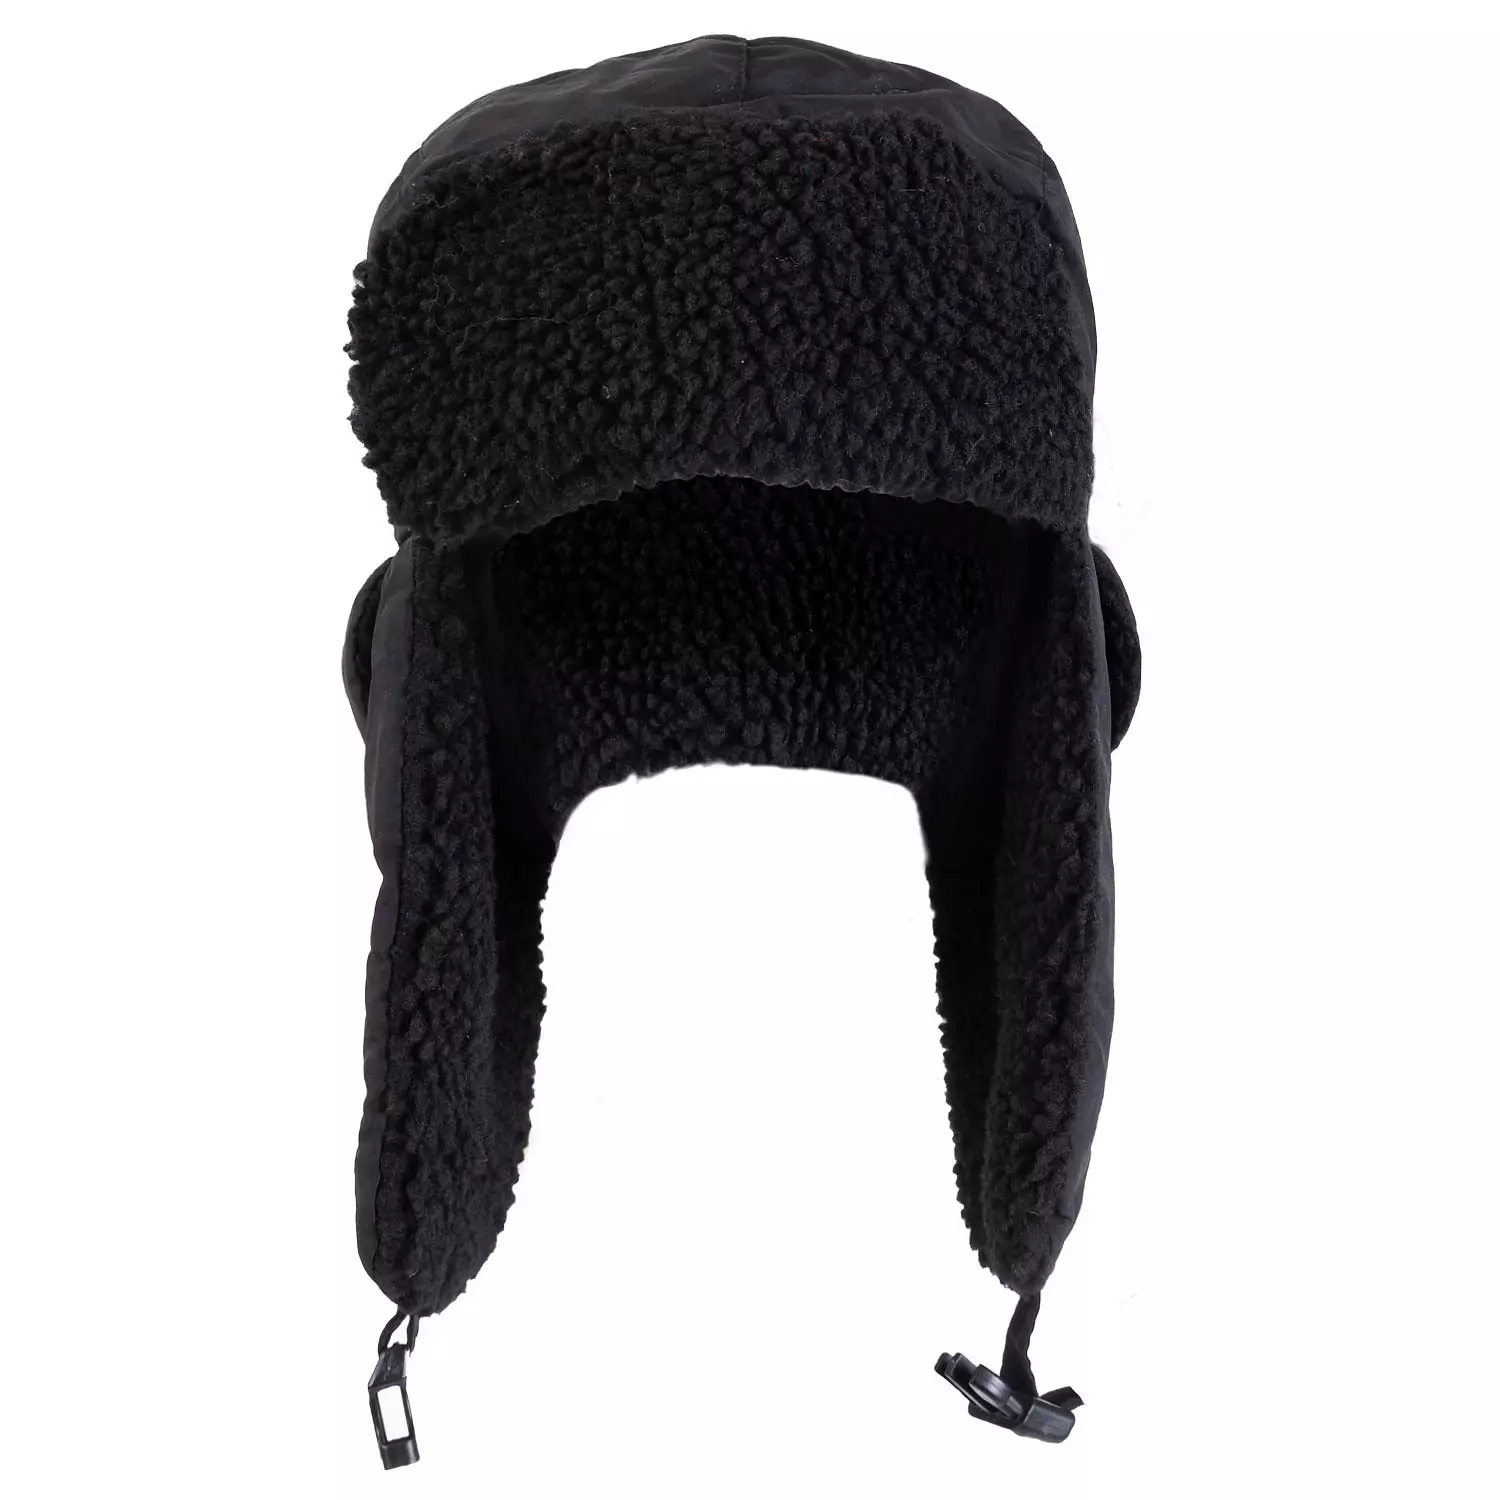 Snötek - Nylon aviator hat with faux sherling trim and faux fur lining